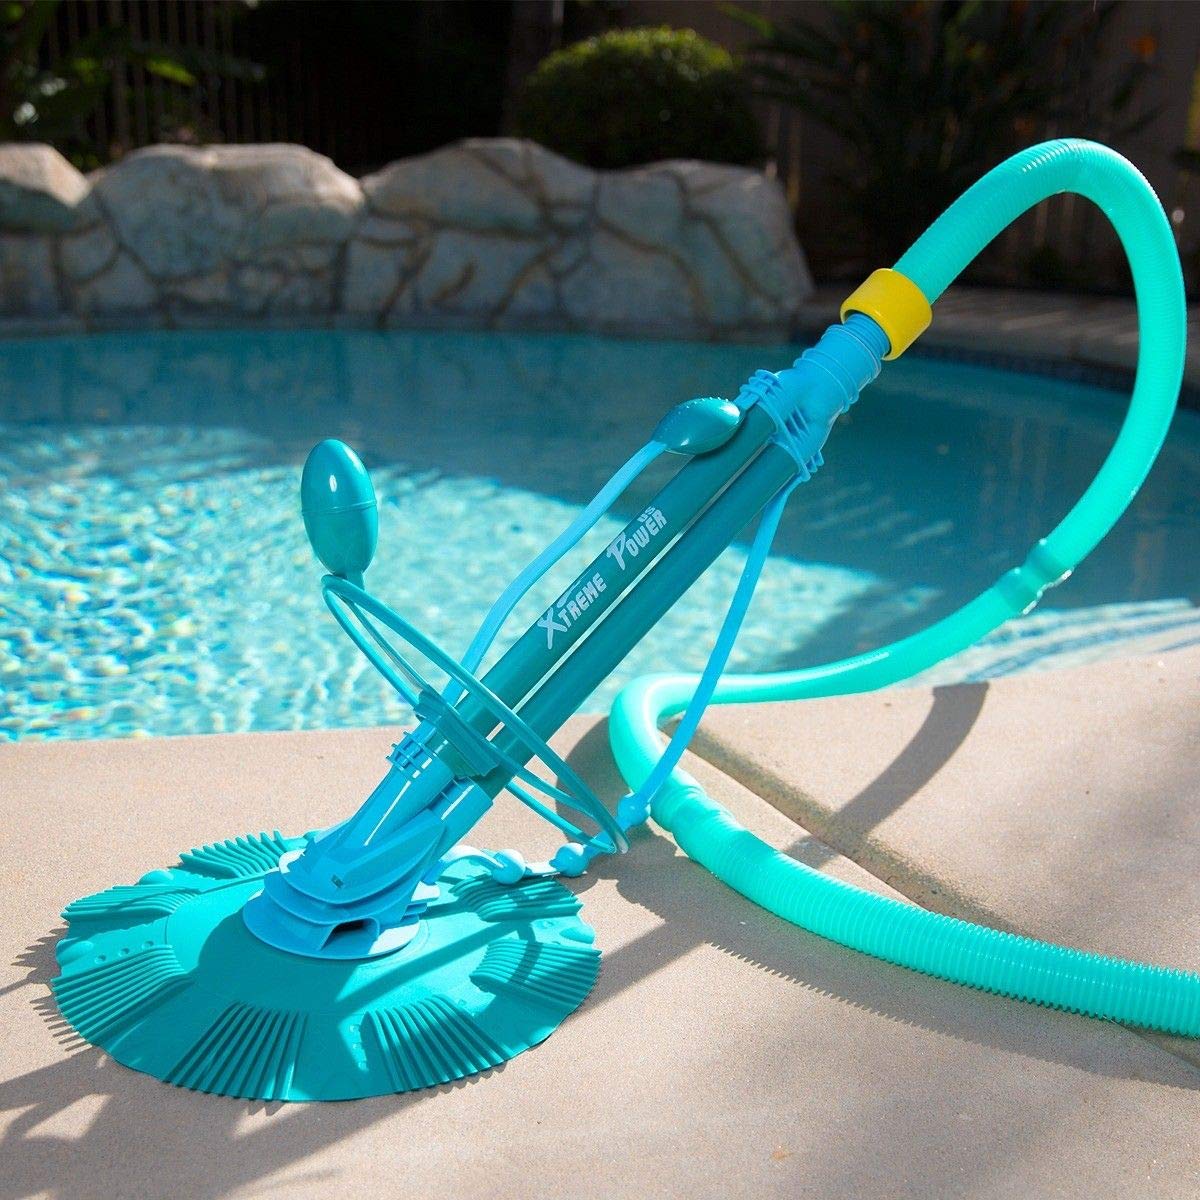 XtremepowerUS Automatic Pool Cleaner Vacuum-generic Pool Cleaner